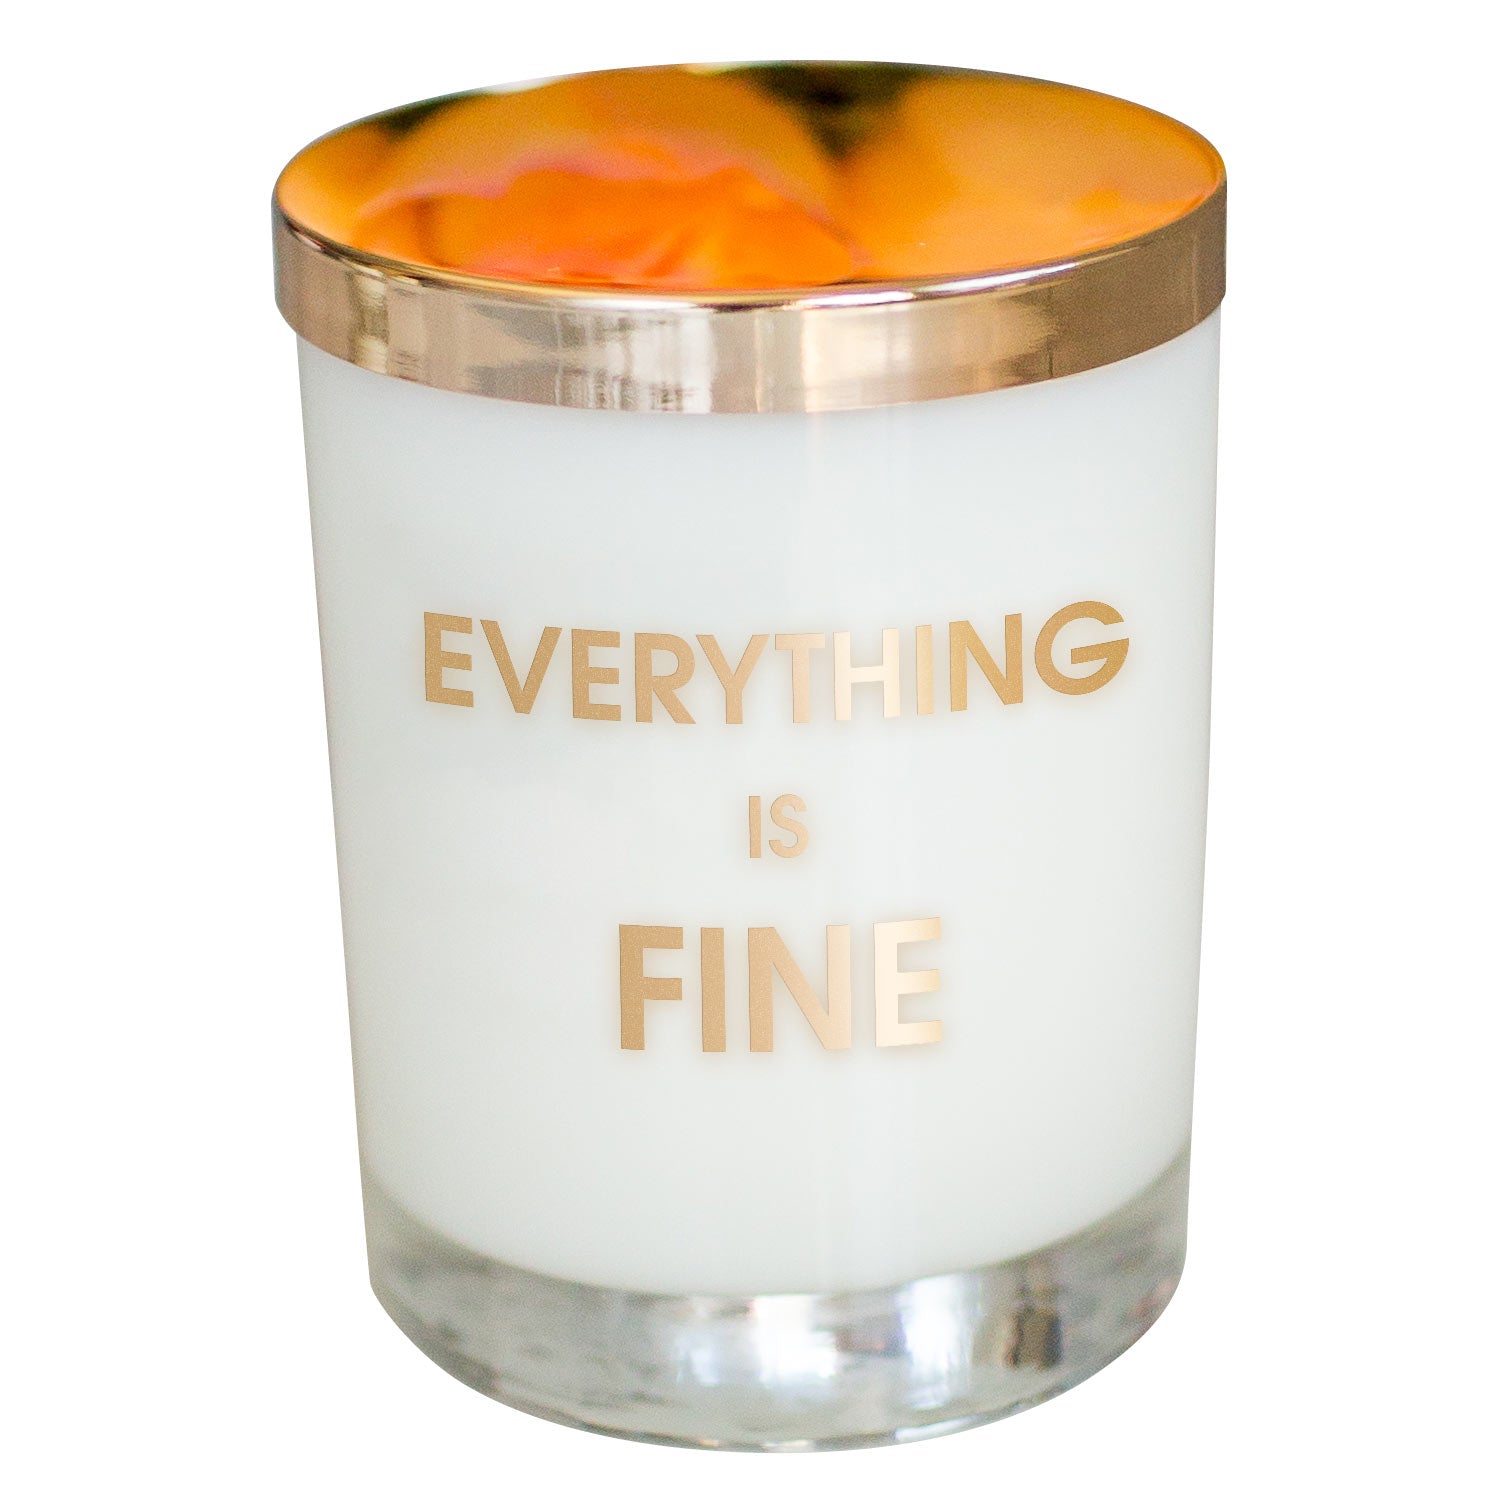 Chez Gagne Chez Gagné Everything is Fine Candle- Gold Foil Rocks Glass